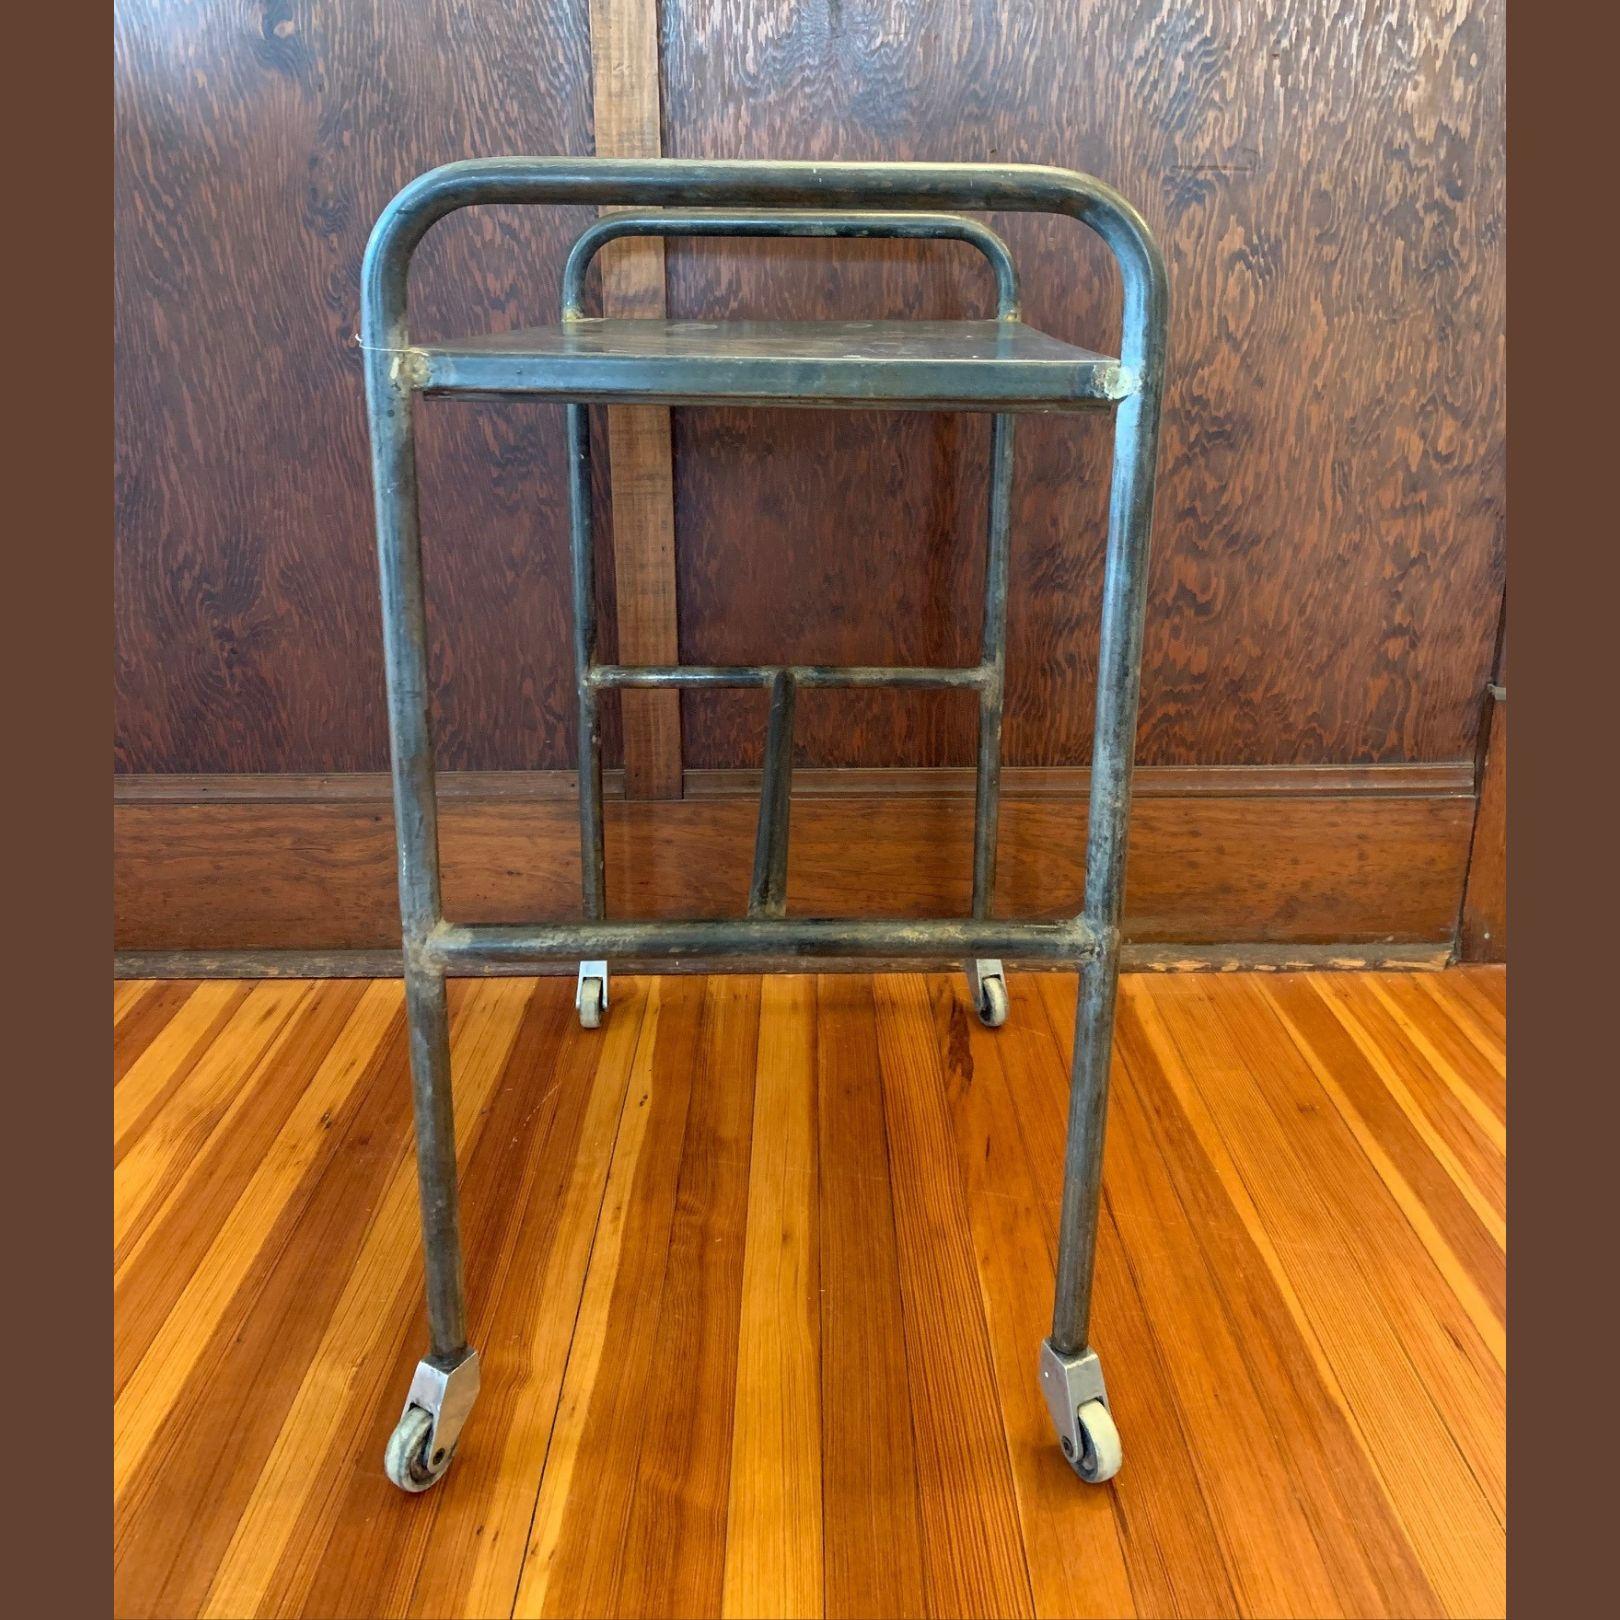 This distressed vintage metal table would make a beautiful addition to any living room, den, or office. Crafted in the United States circa 1990 and made of industrial brushed steel, the table sits on four well-oiled wheels with a stretcher to